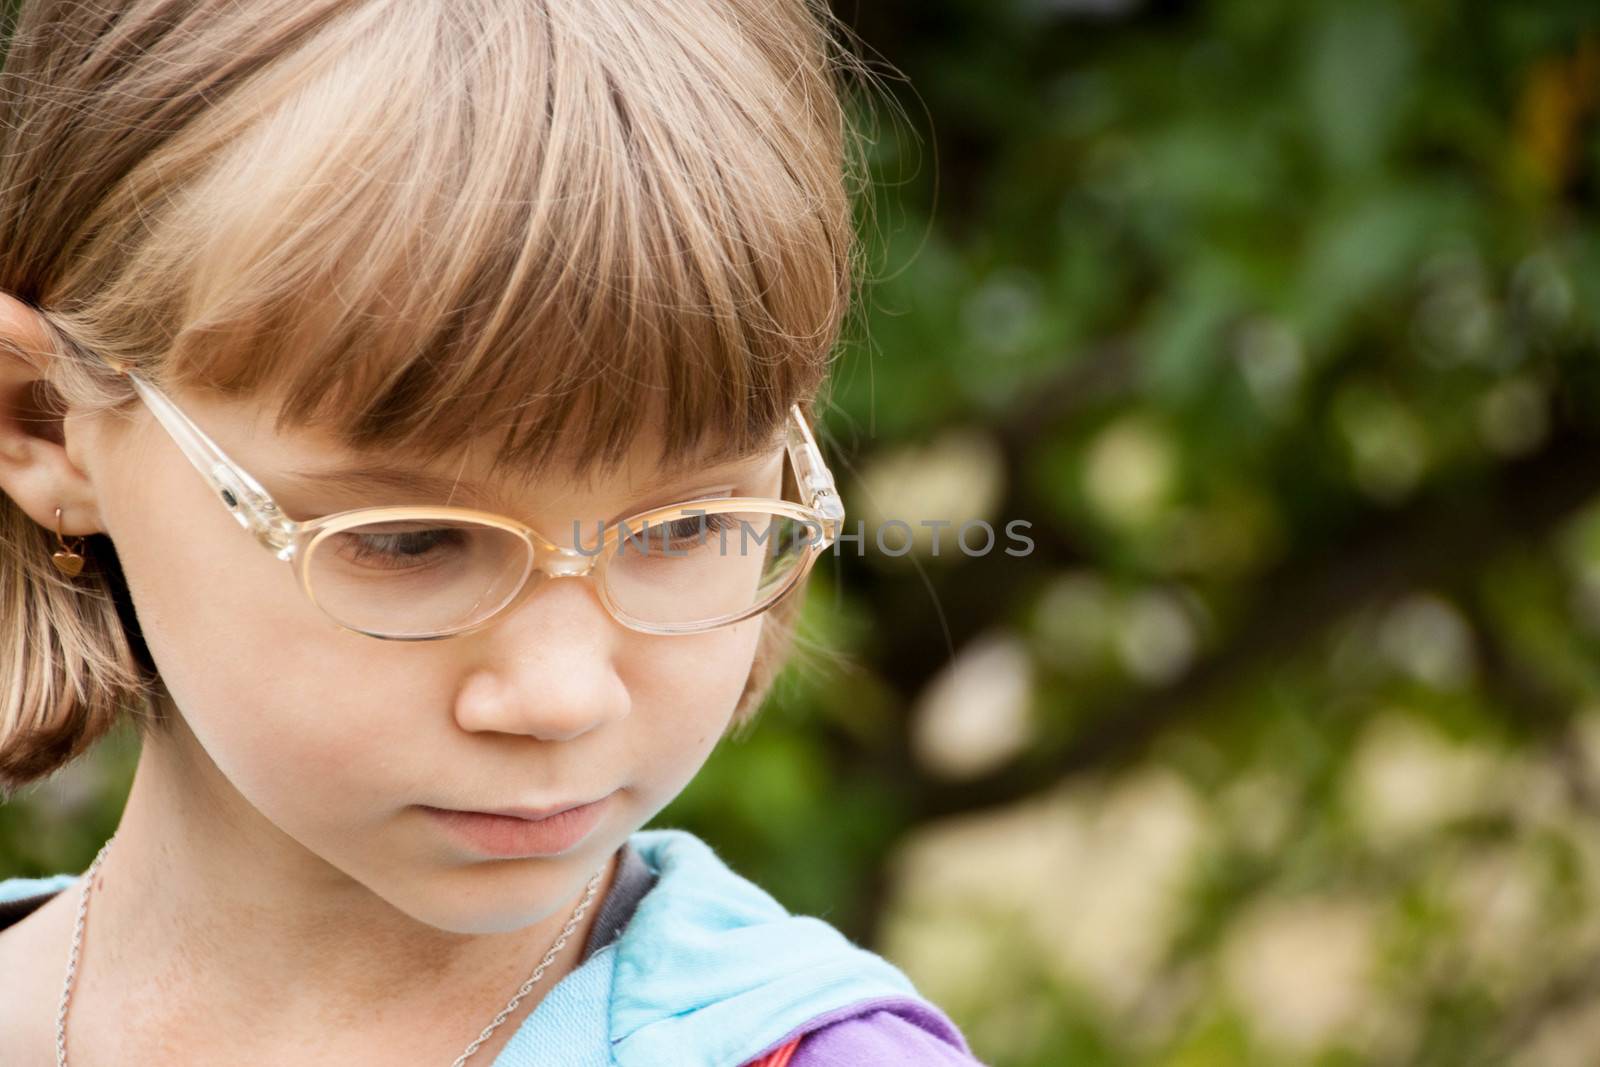  little blond girl with glasses bent her head